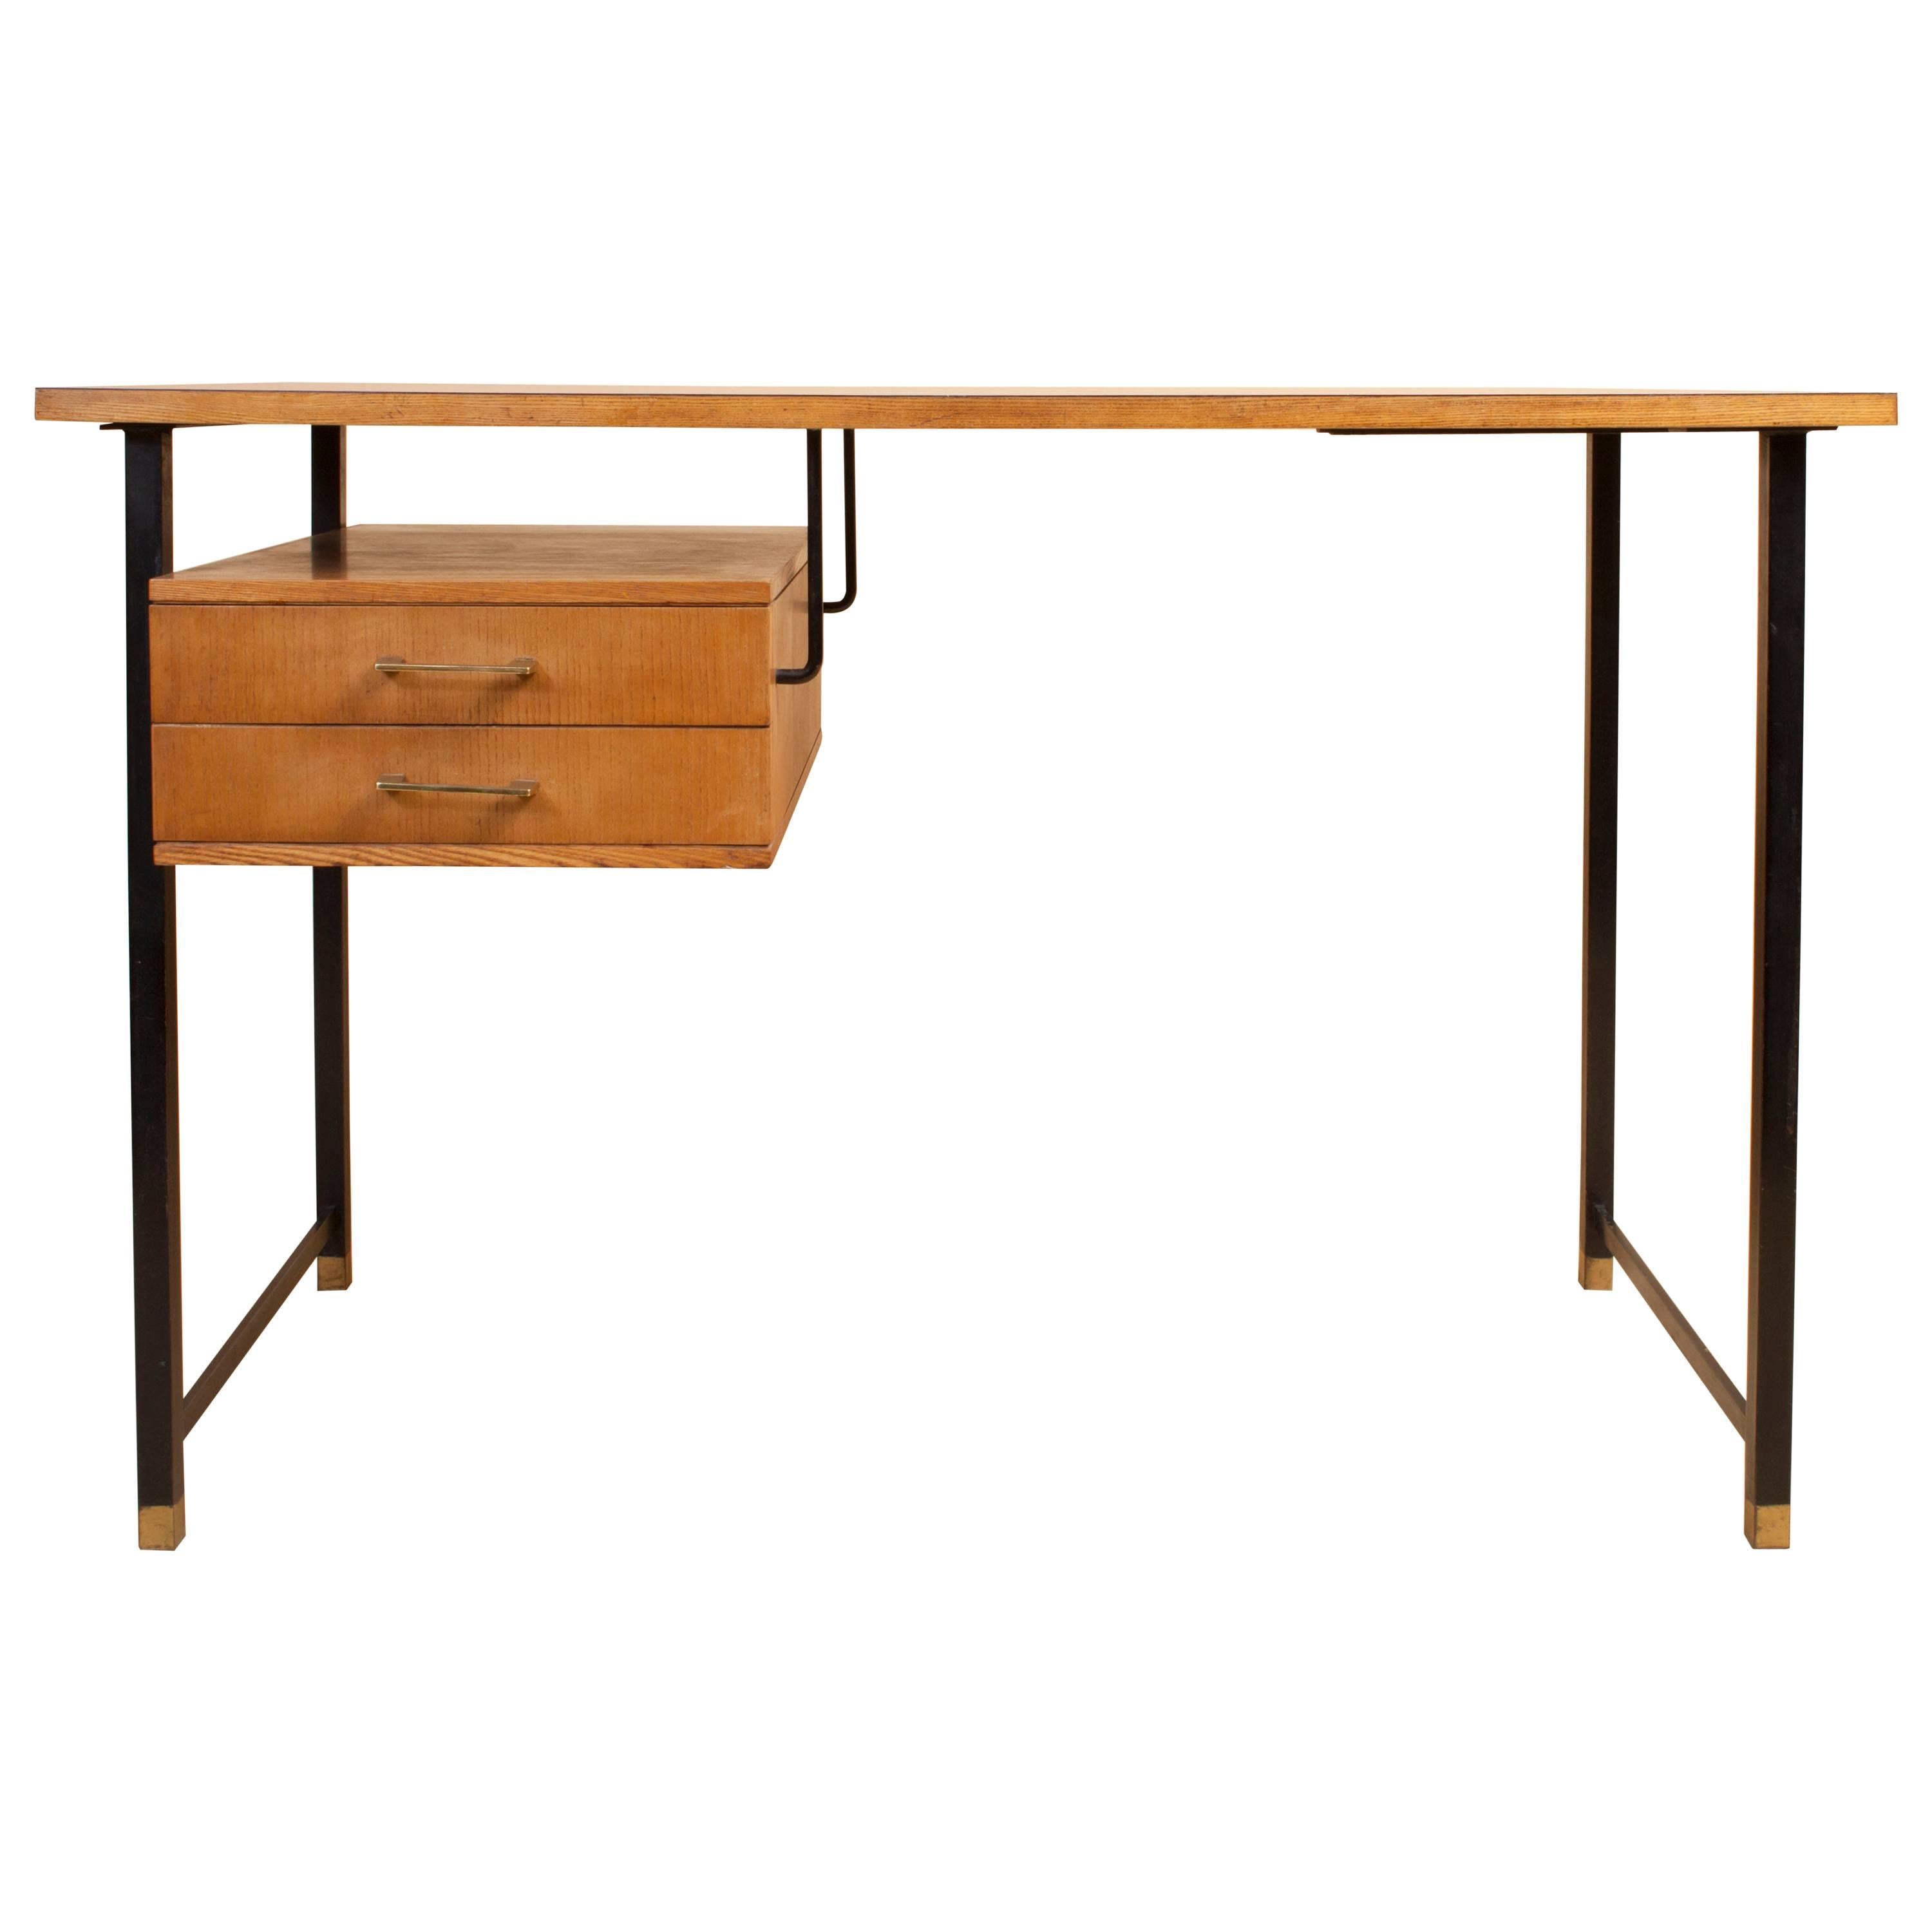 20th Century, Italian Desk 1960s Made of Ash and Peach Formica For Sale